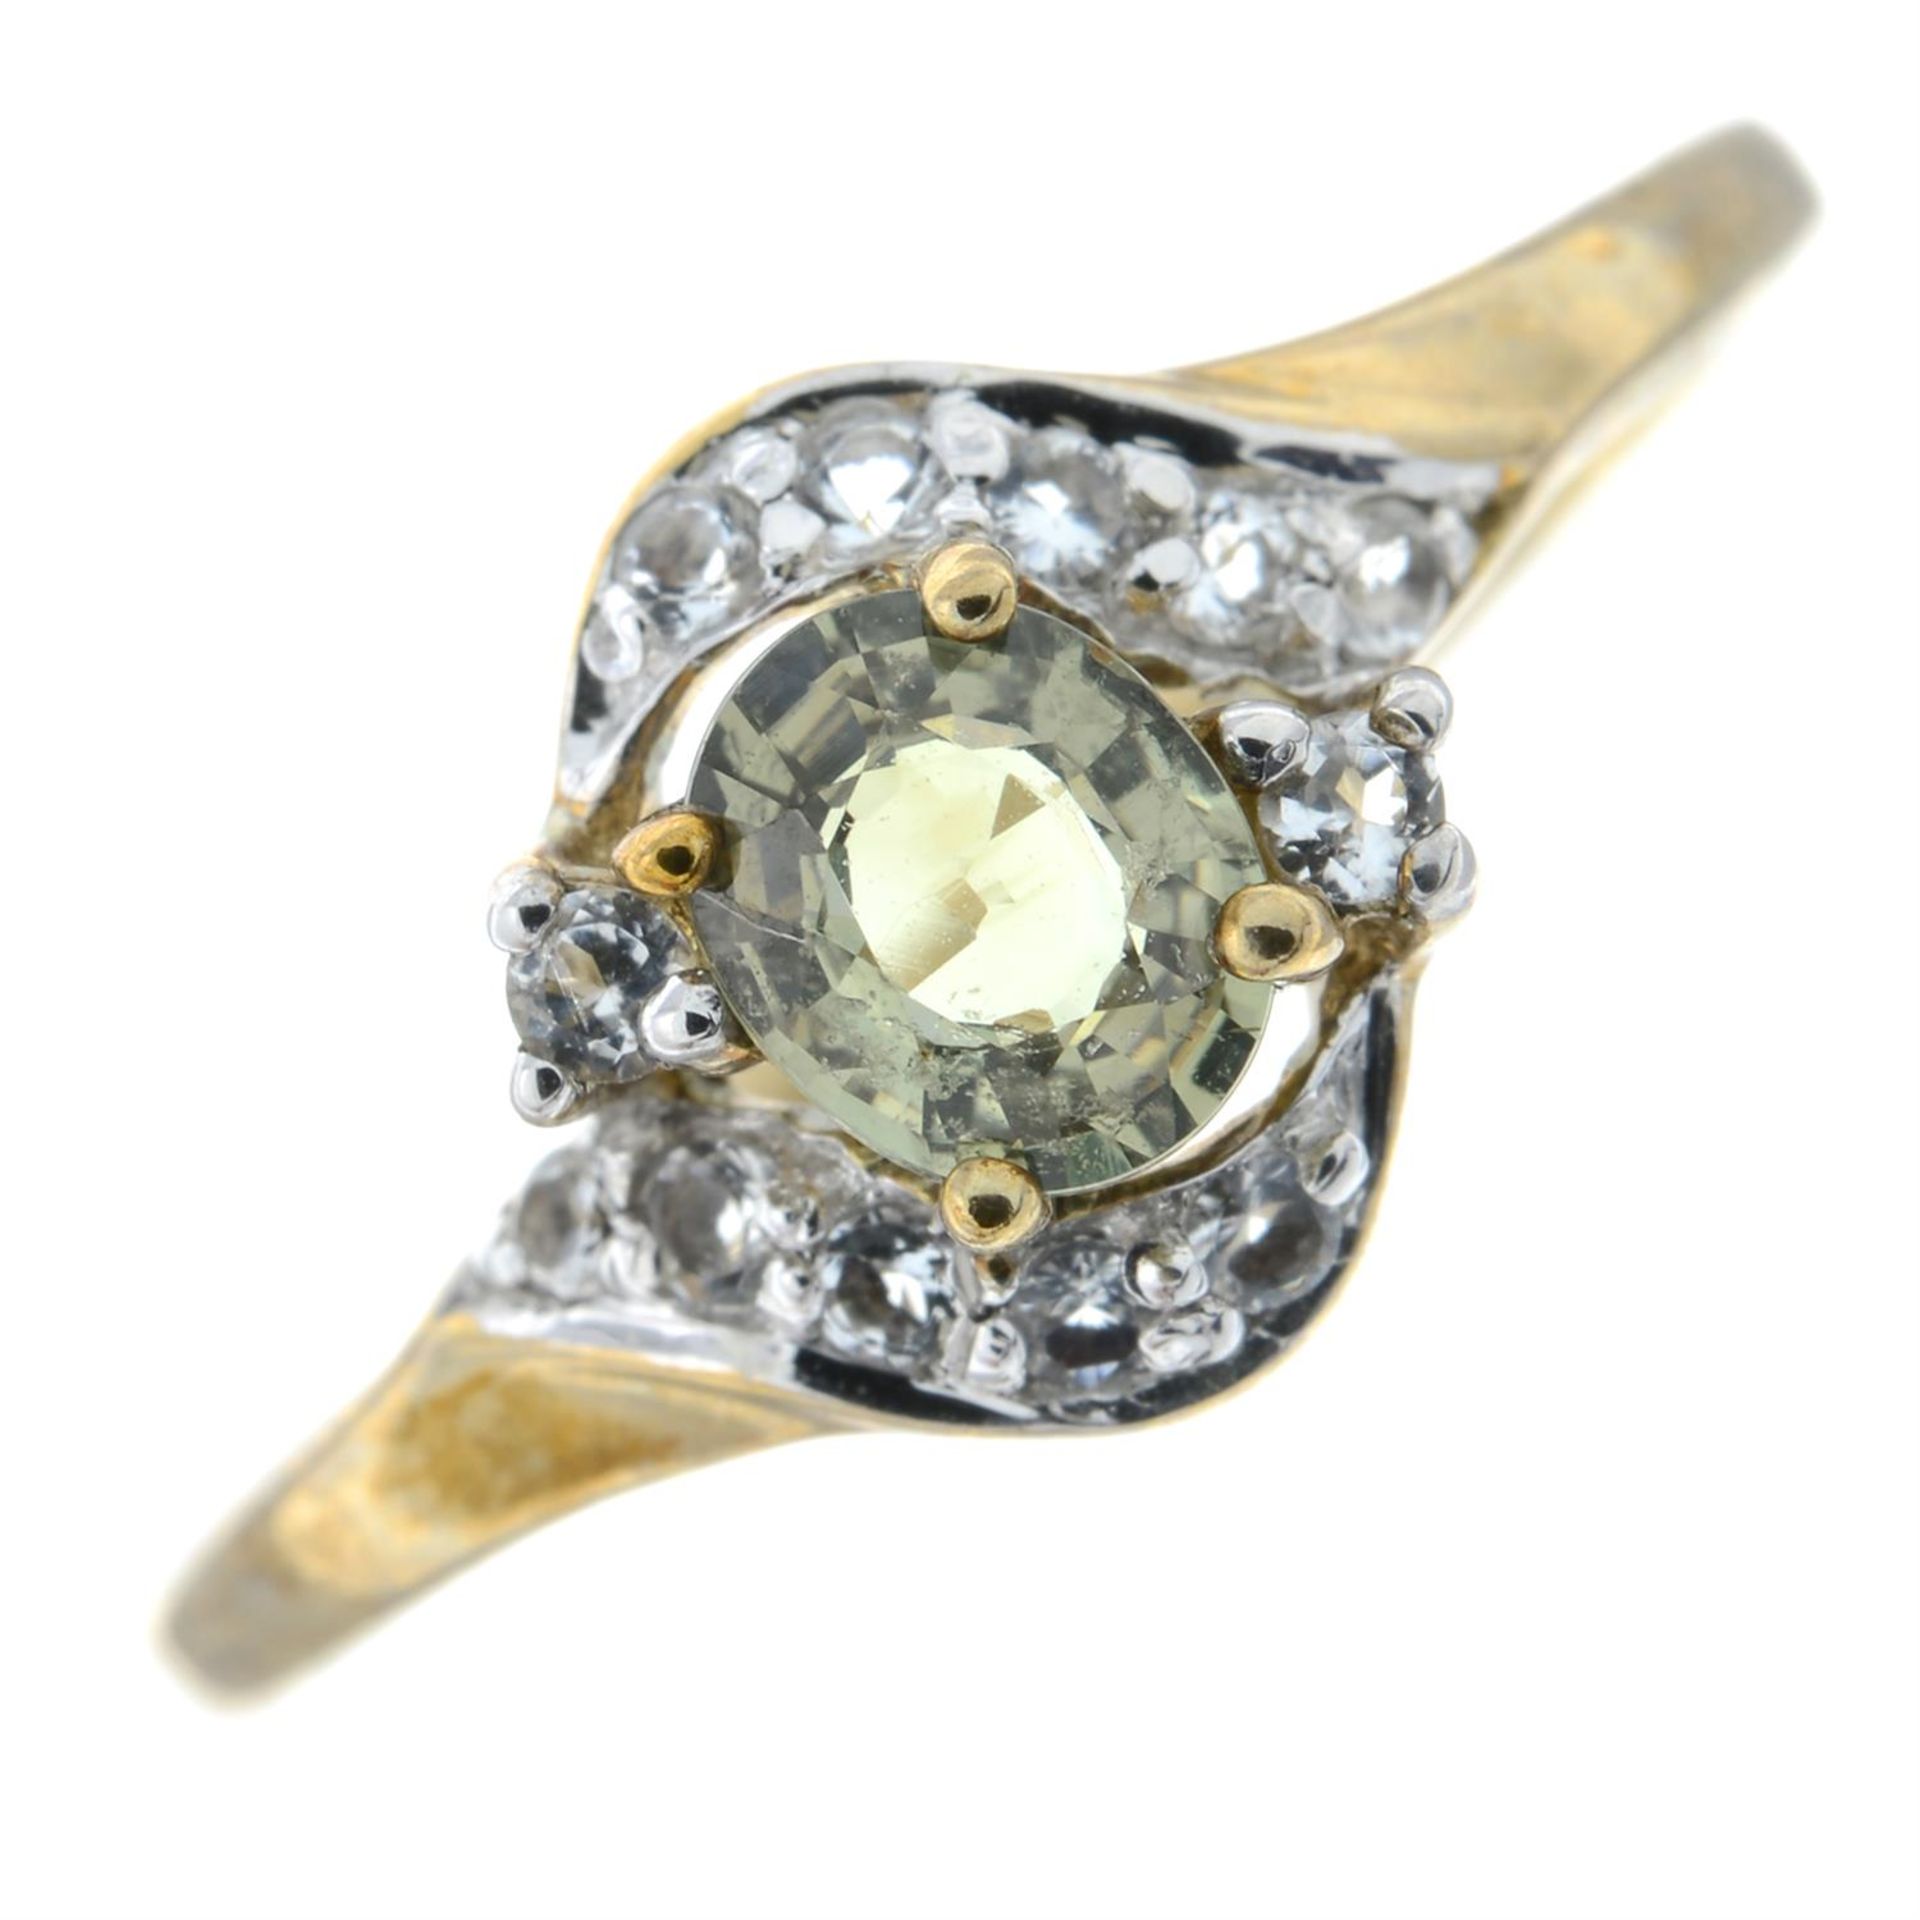 A 9ct gold green sapphire and colourless gem dress ring.